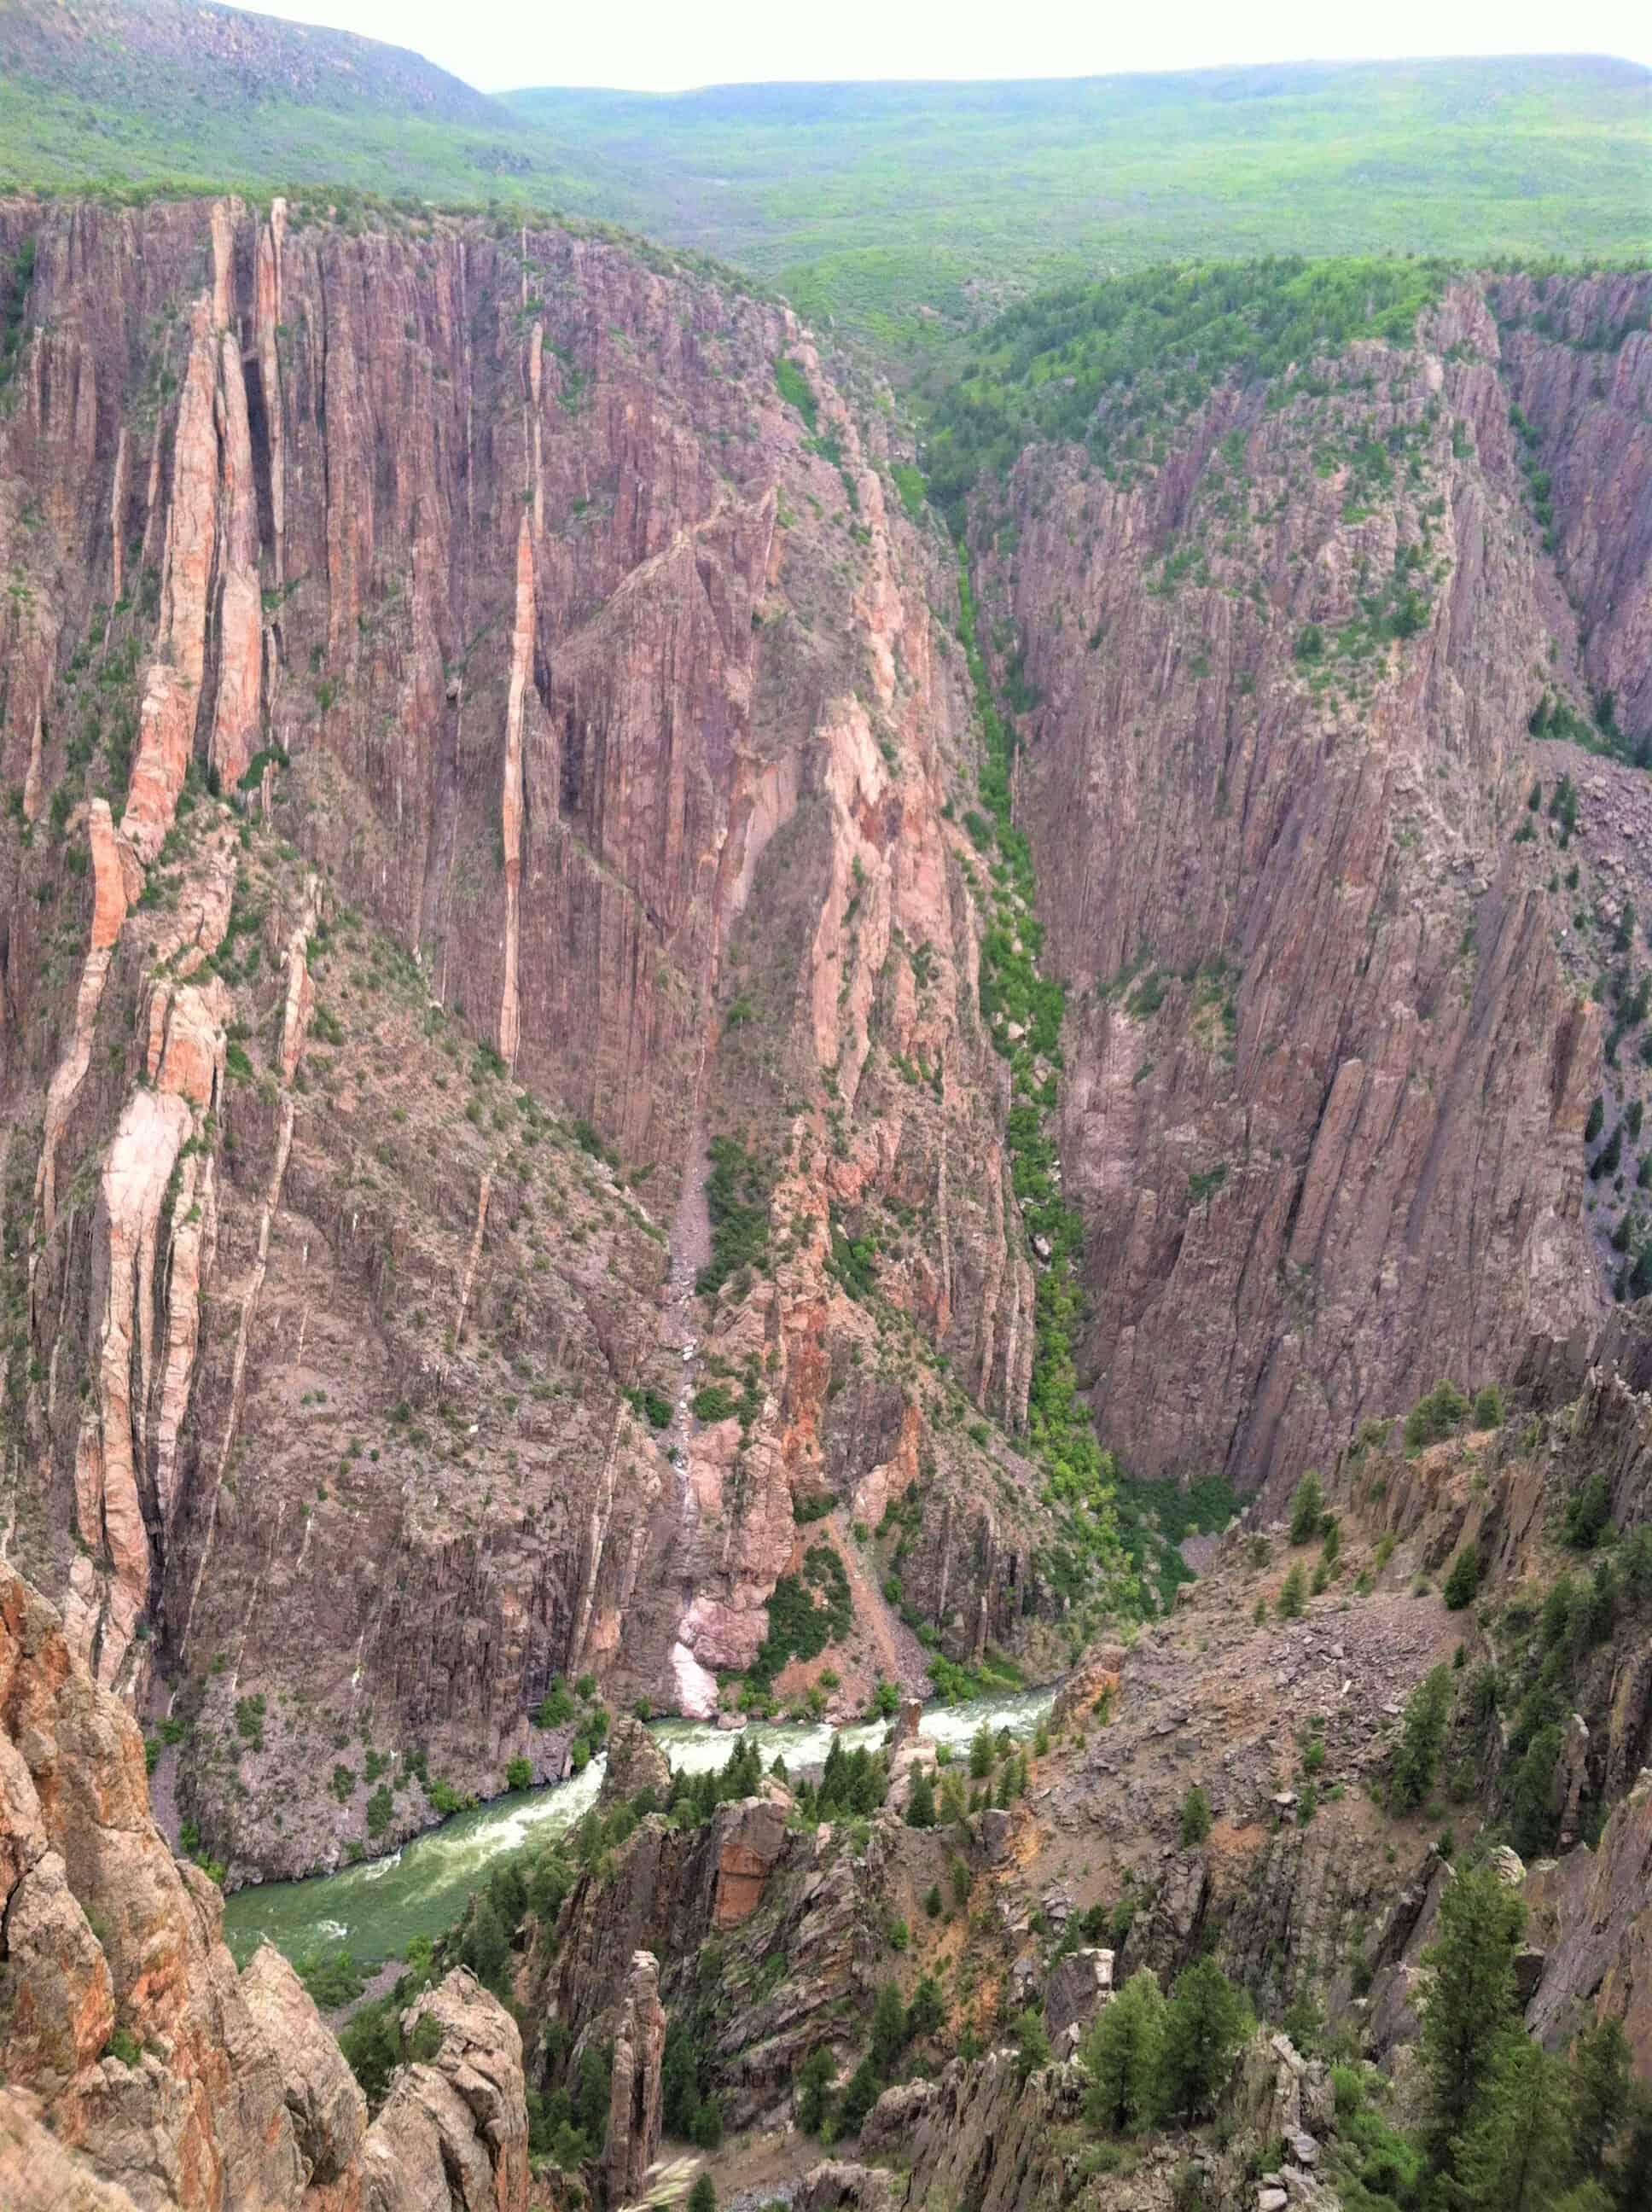 Looking into the Canyon at Black Canyon of the Gunnison National Park